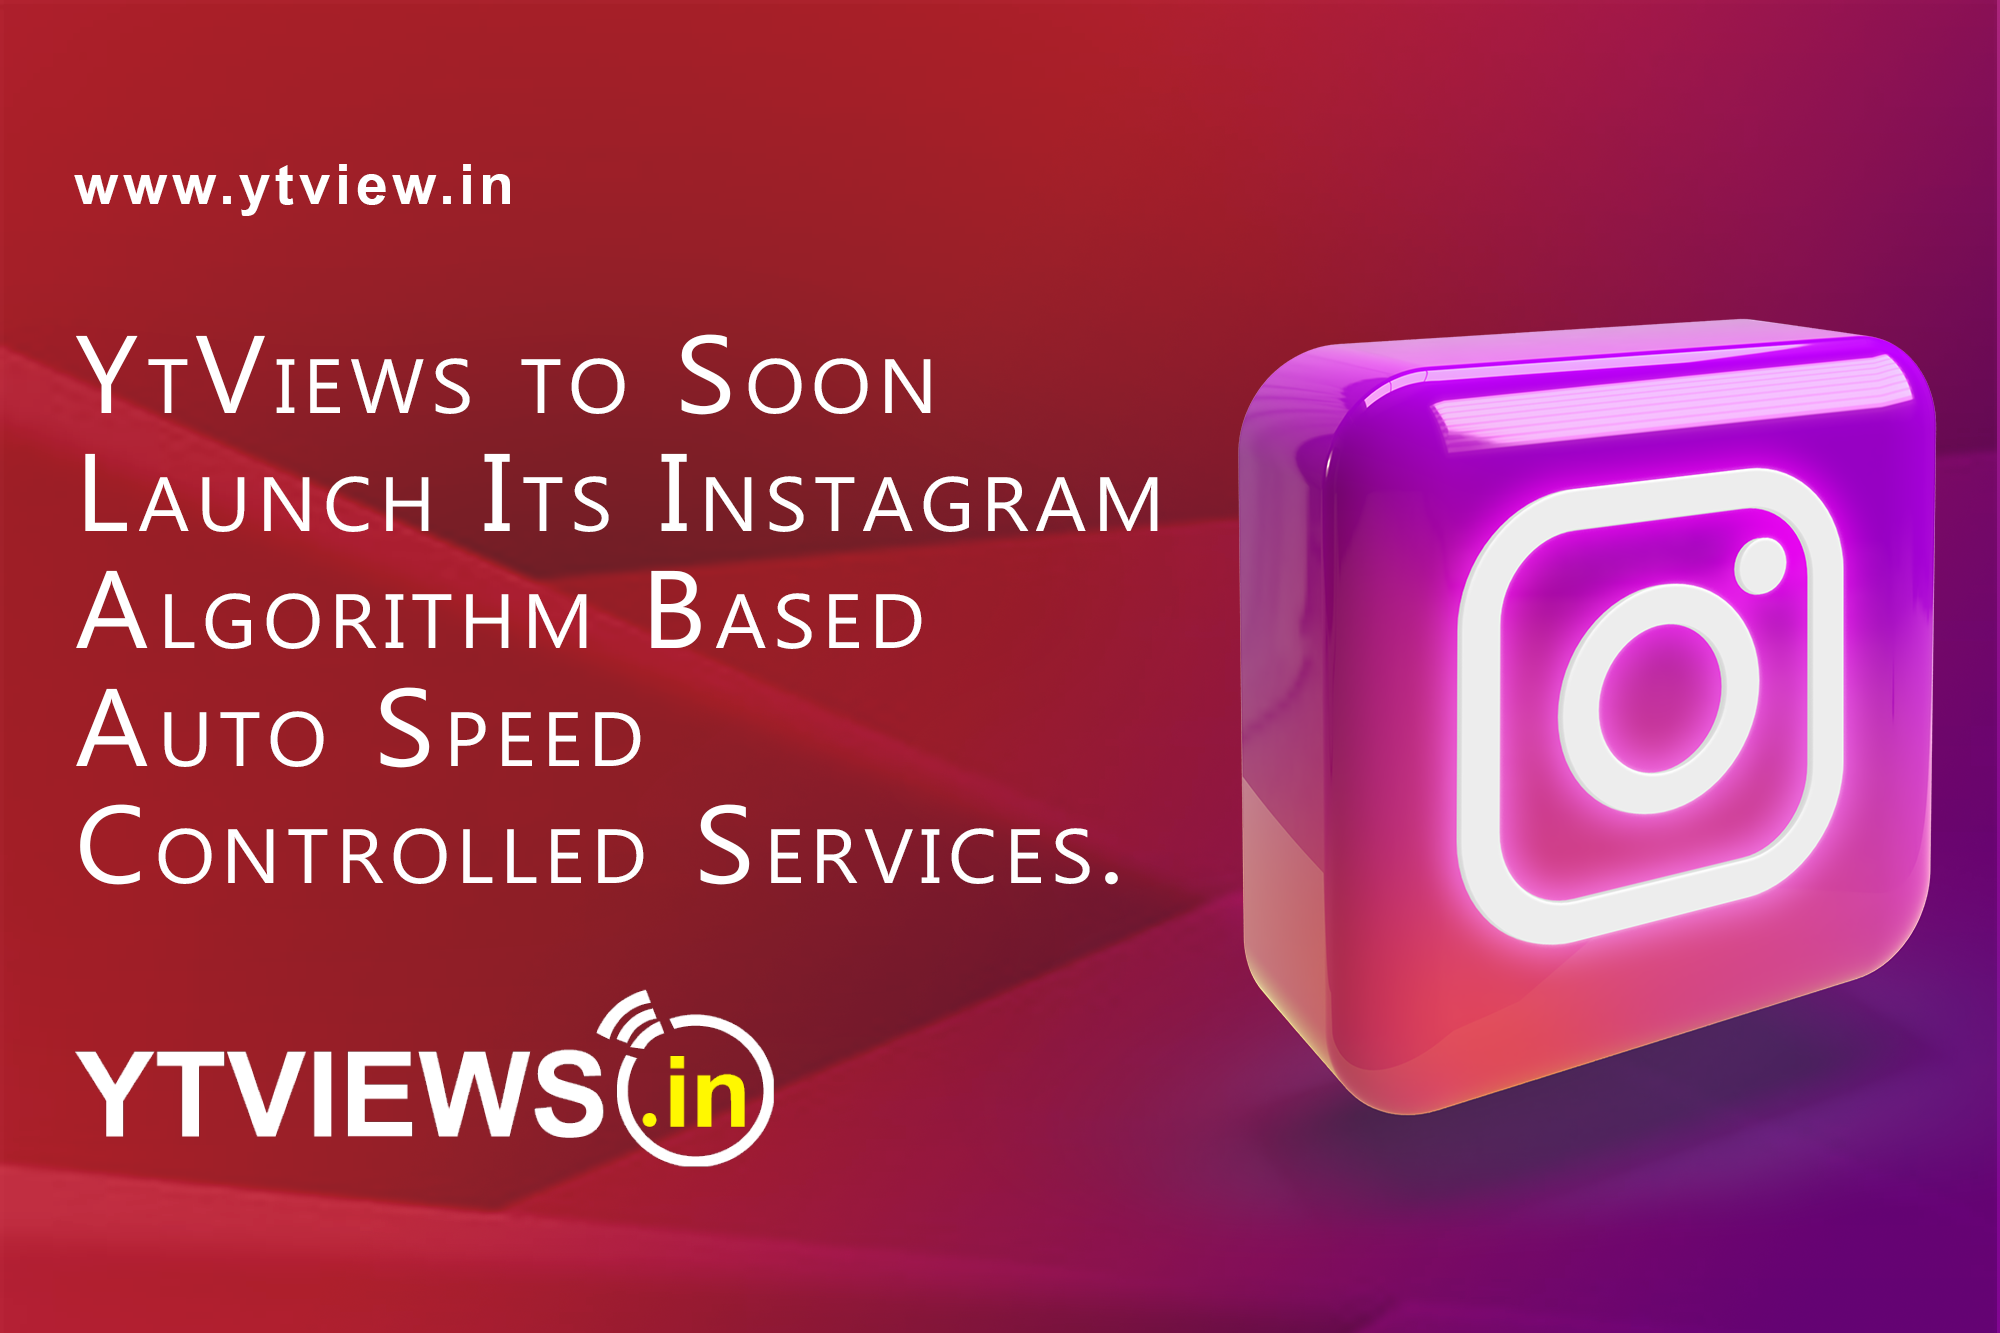 Ytviews to Soon Launch Its Instagram Algorithm Based Auto Speed Controlled Services.